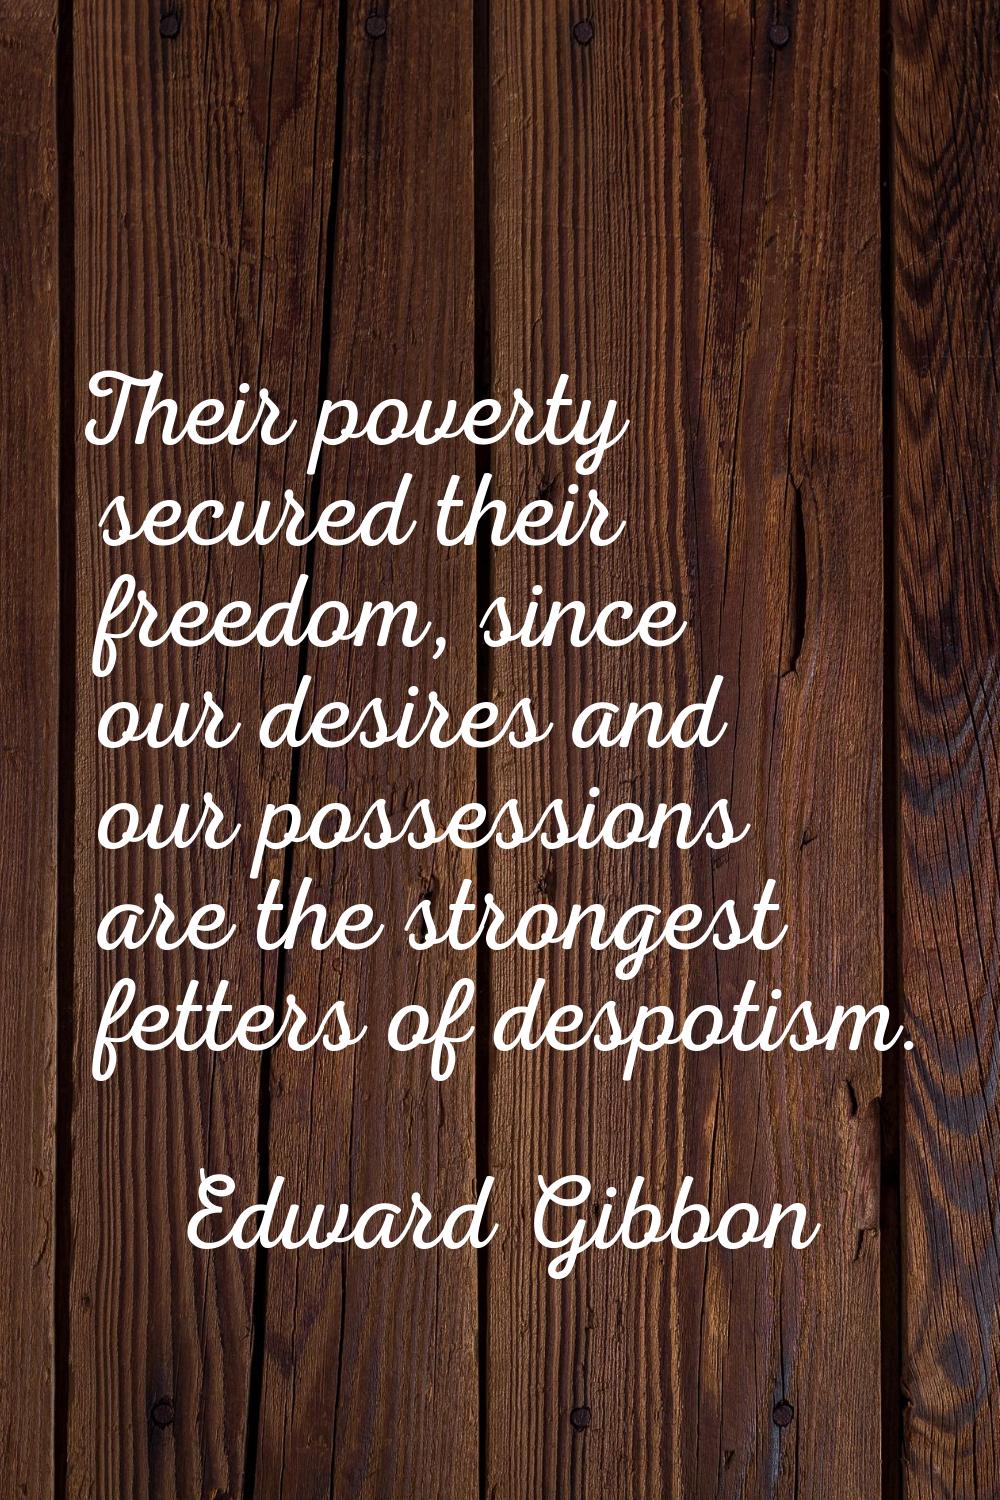 Their poverty secured their freedom, since our desires and our possessions are the strongest fetter